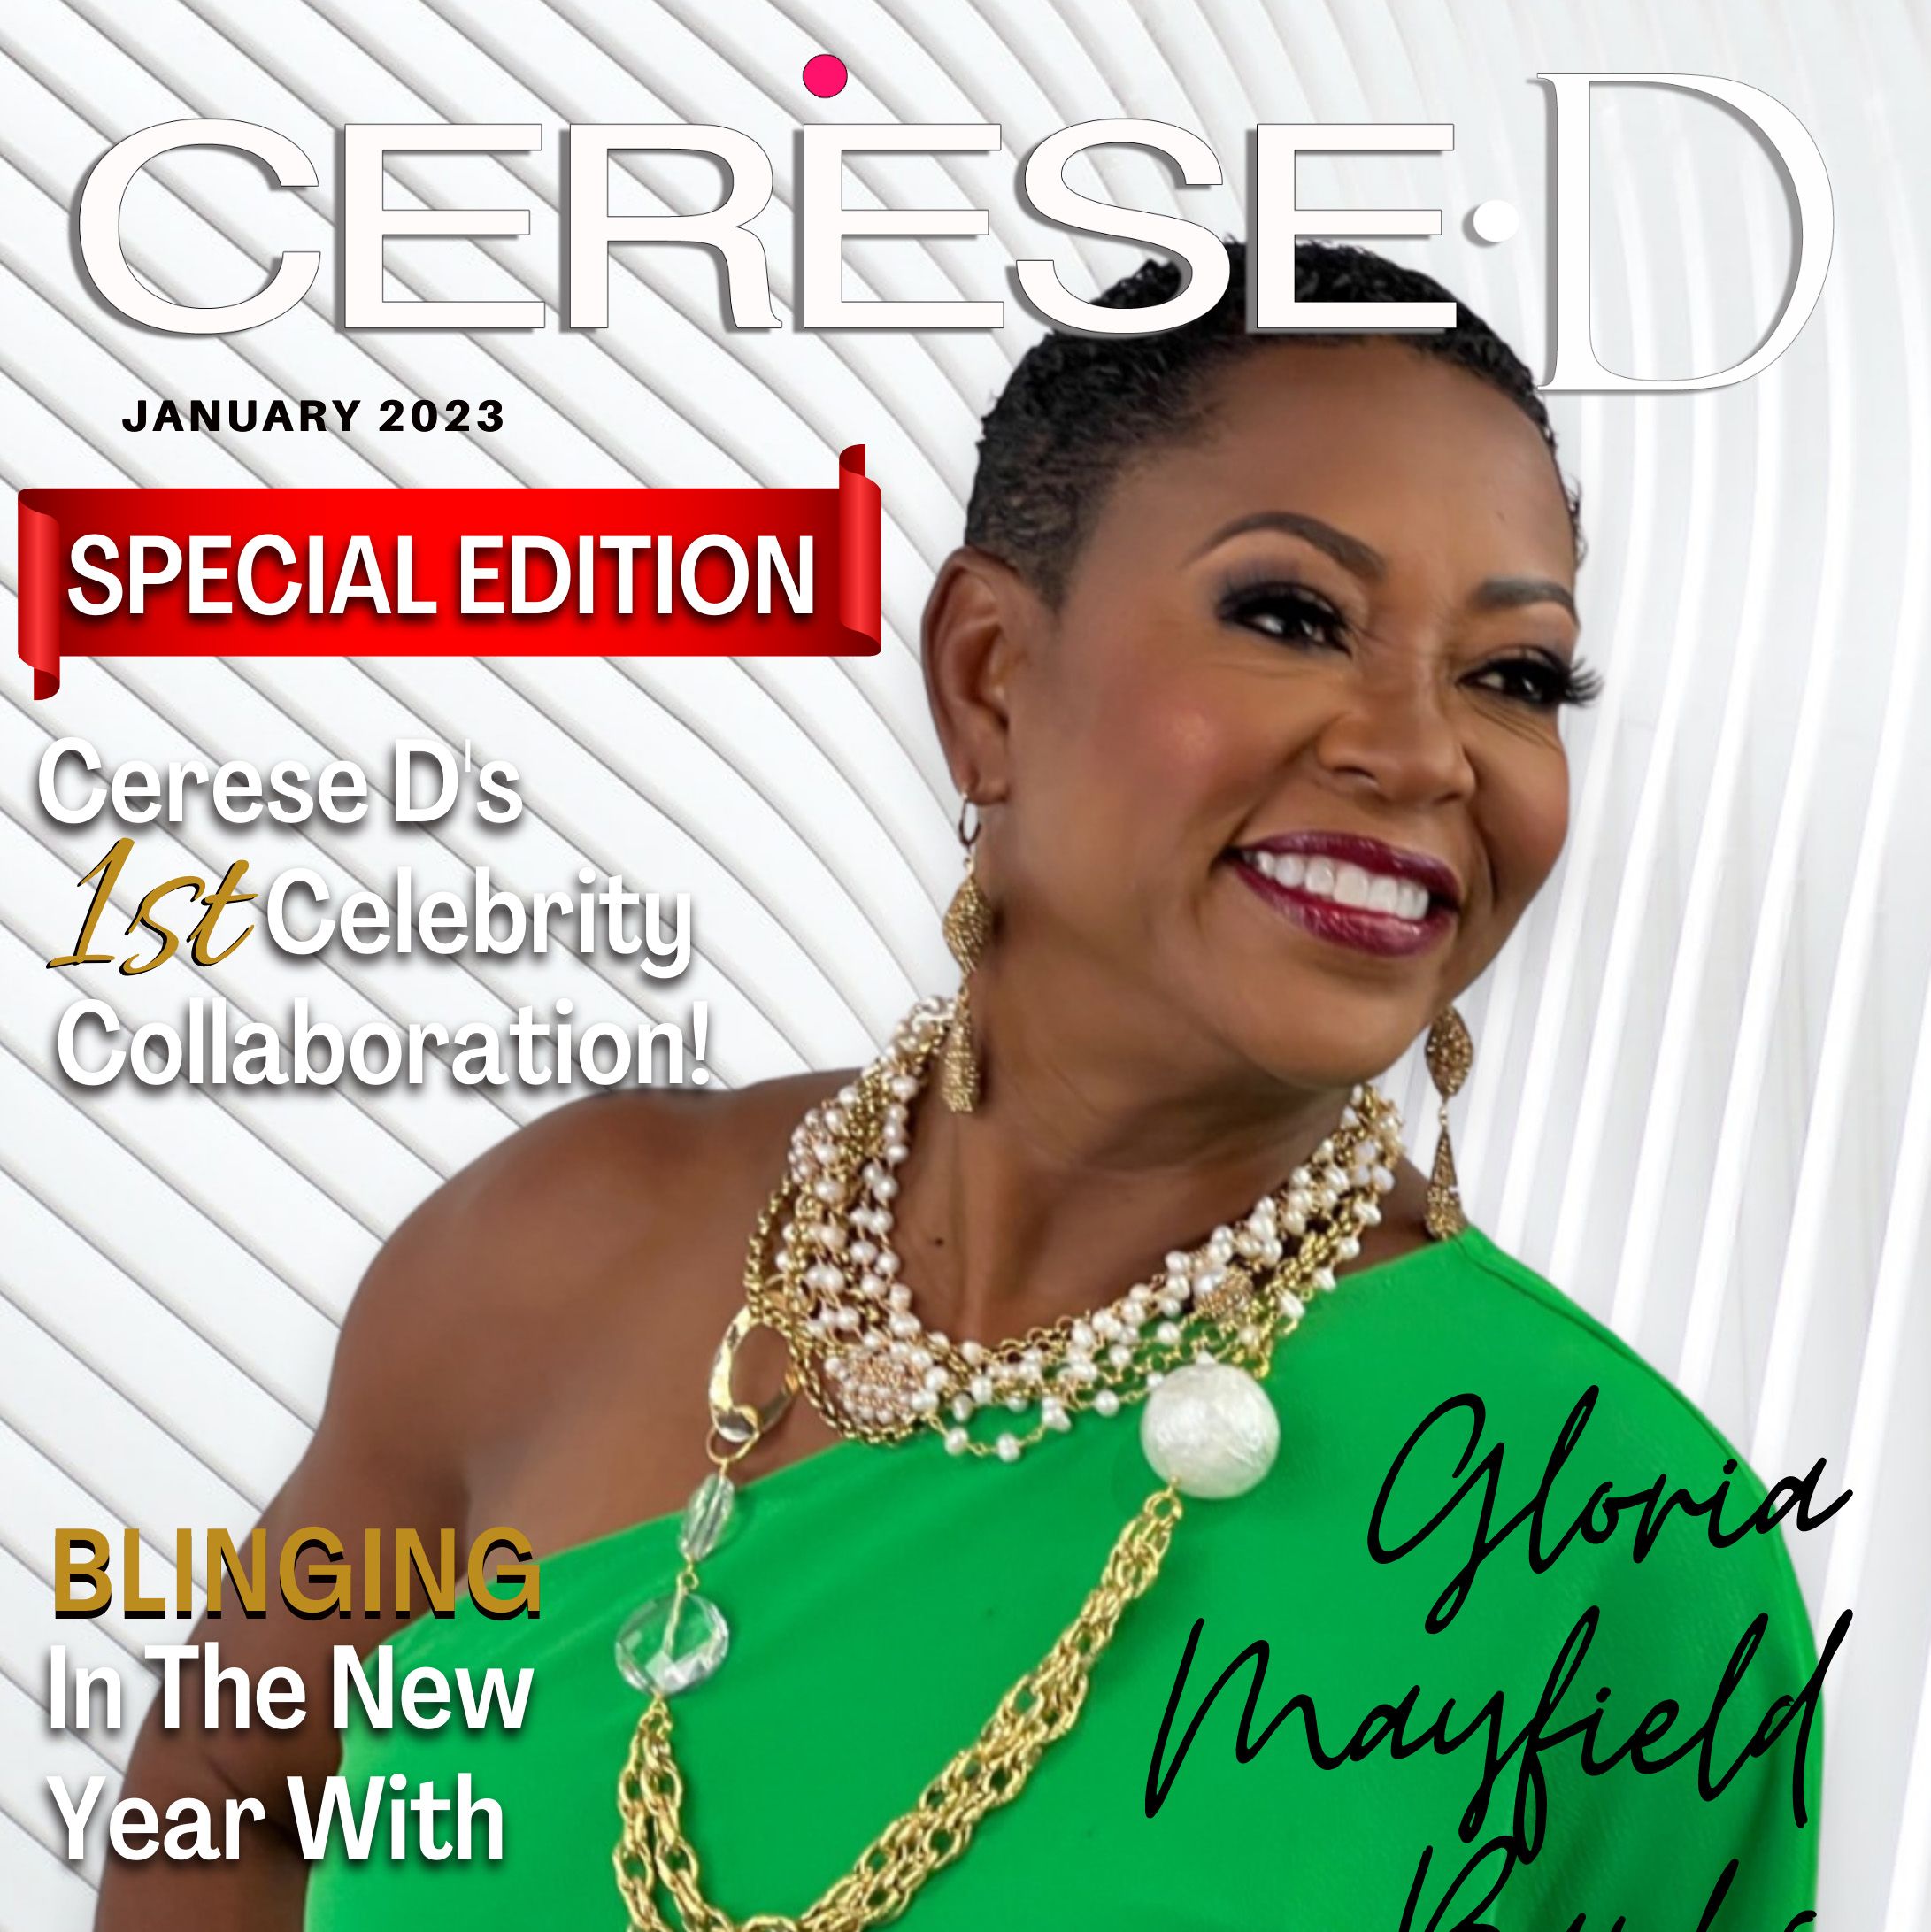 Image of a smiling woman named Gloria Mayfield Banks on a magazine cover wearing a bright green off the should top and multiple large chains necklaces with various white beads with a white swirly background